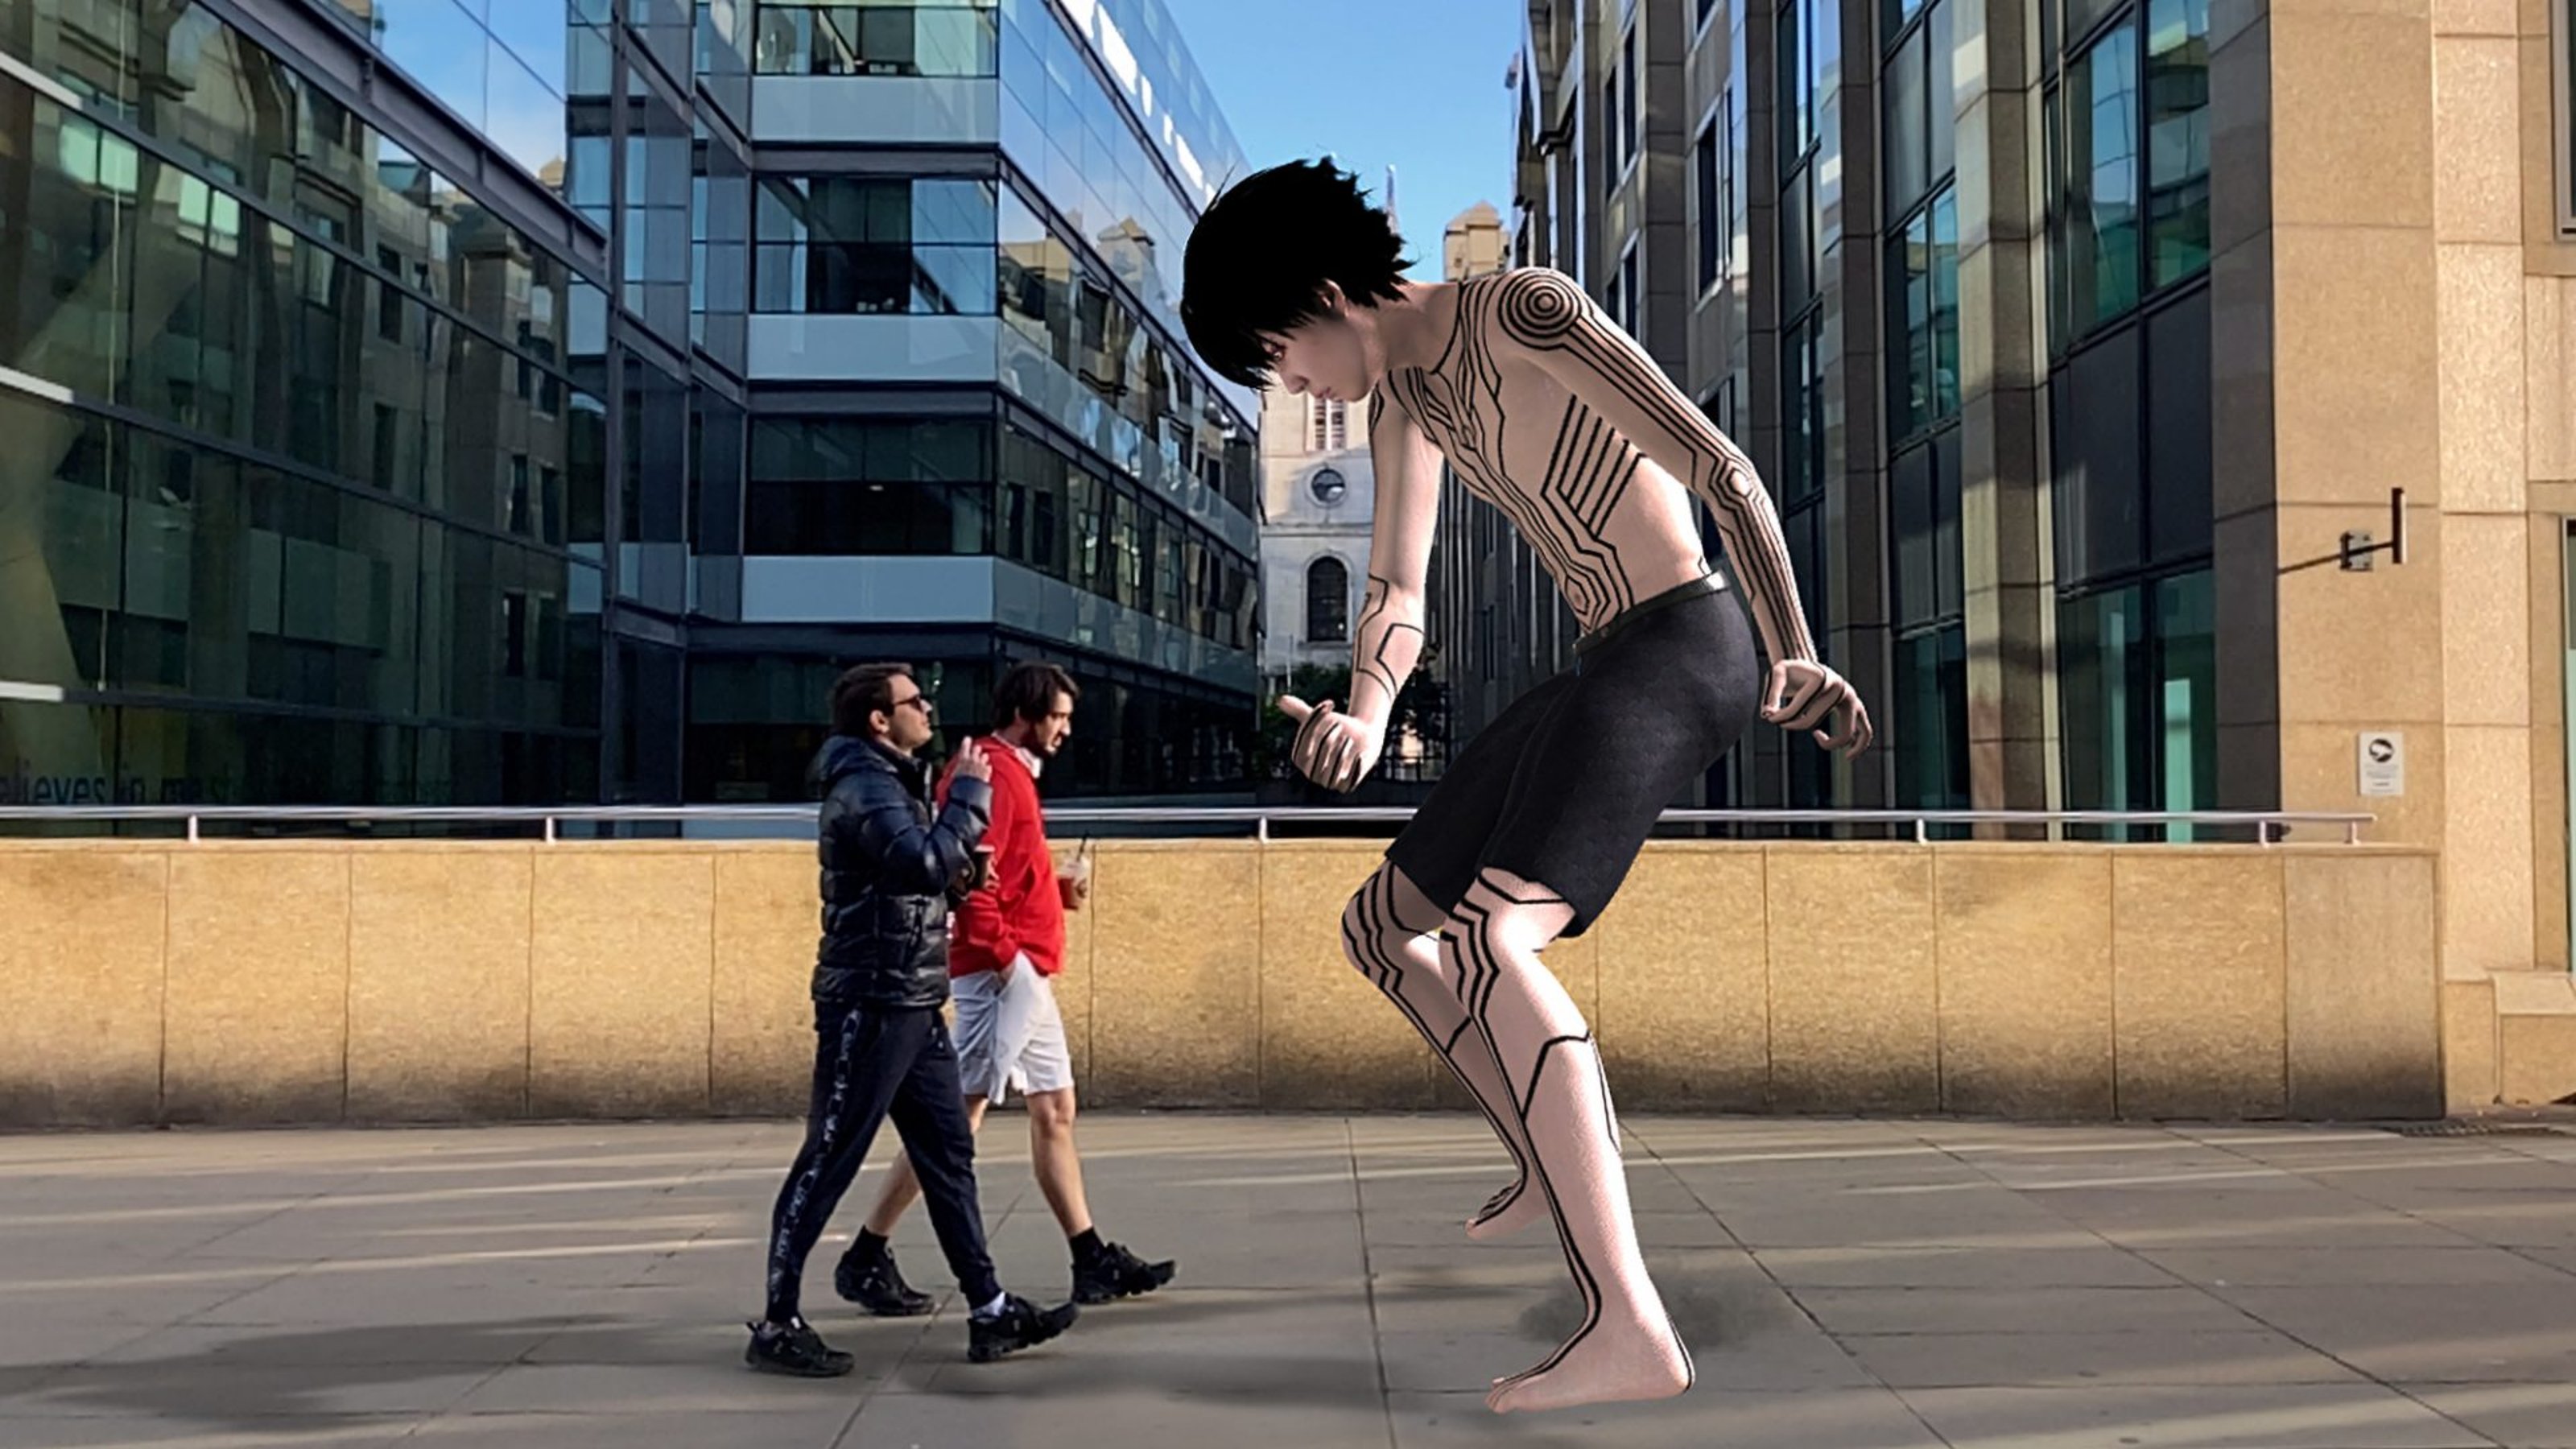 A giant digital figure in front of two people walking on the street